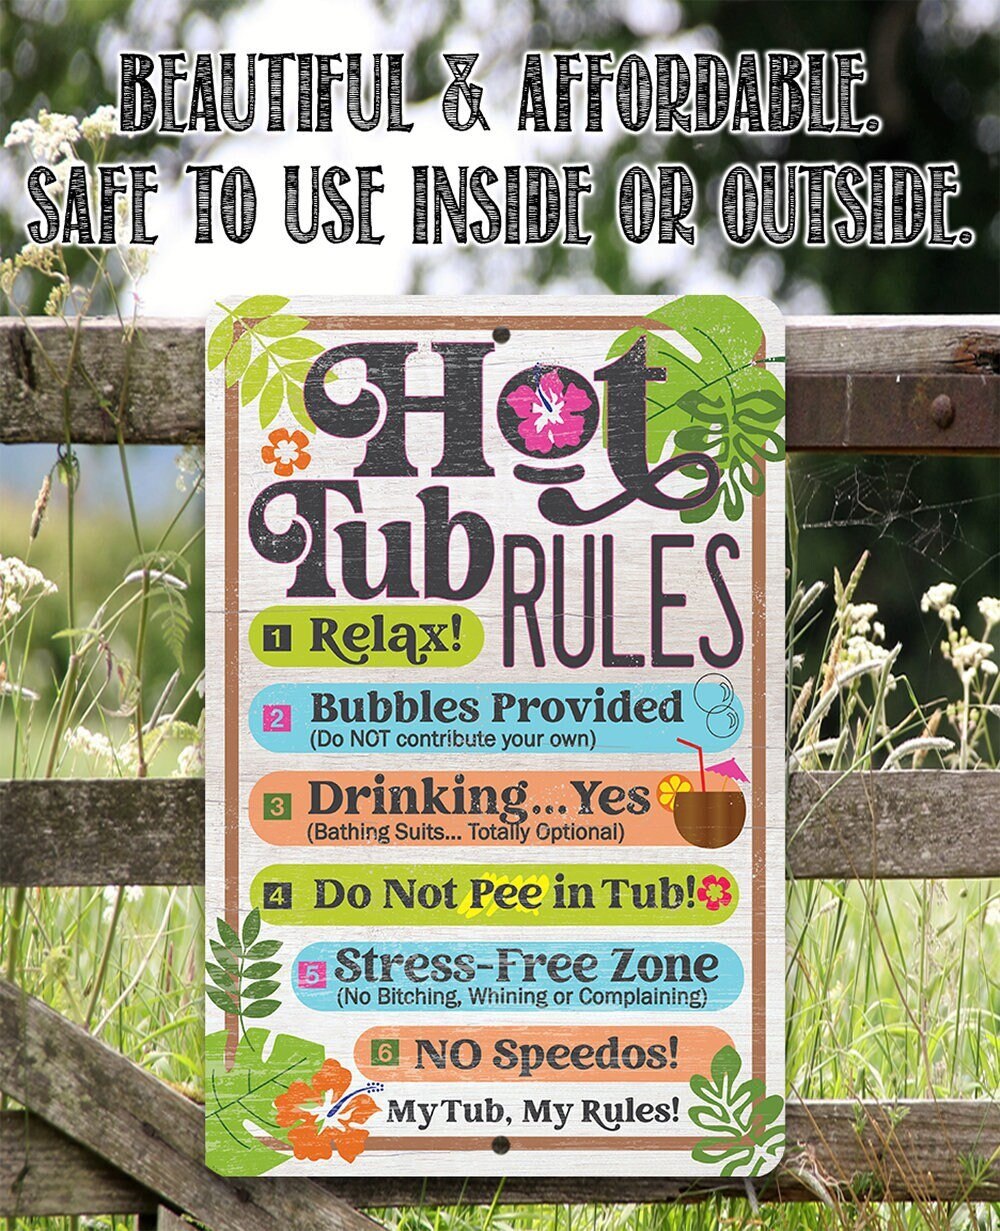 Hot Tub Rules - 8" x 12" or 12" x 18" Aluminum Tin Awesome Metal Poster Lone Star Art 